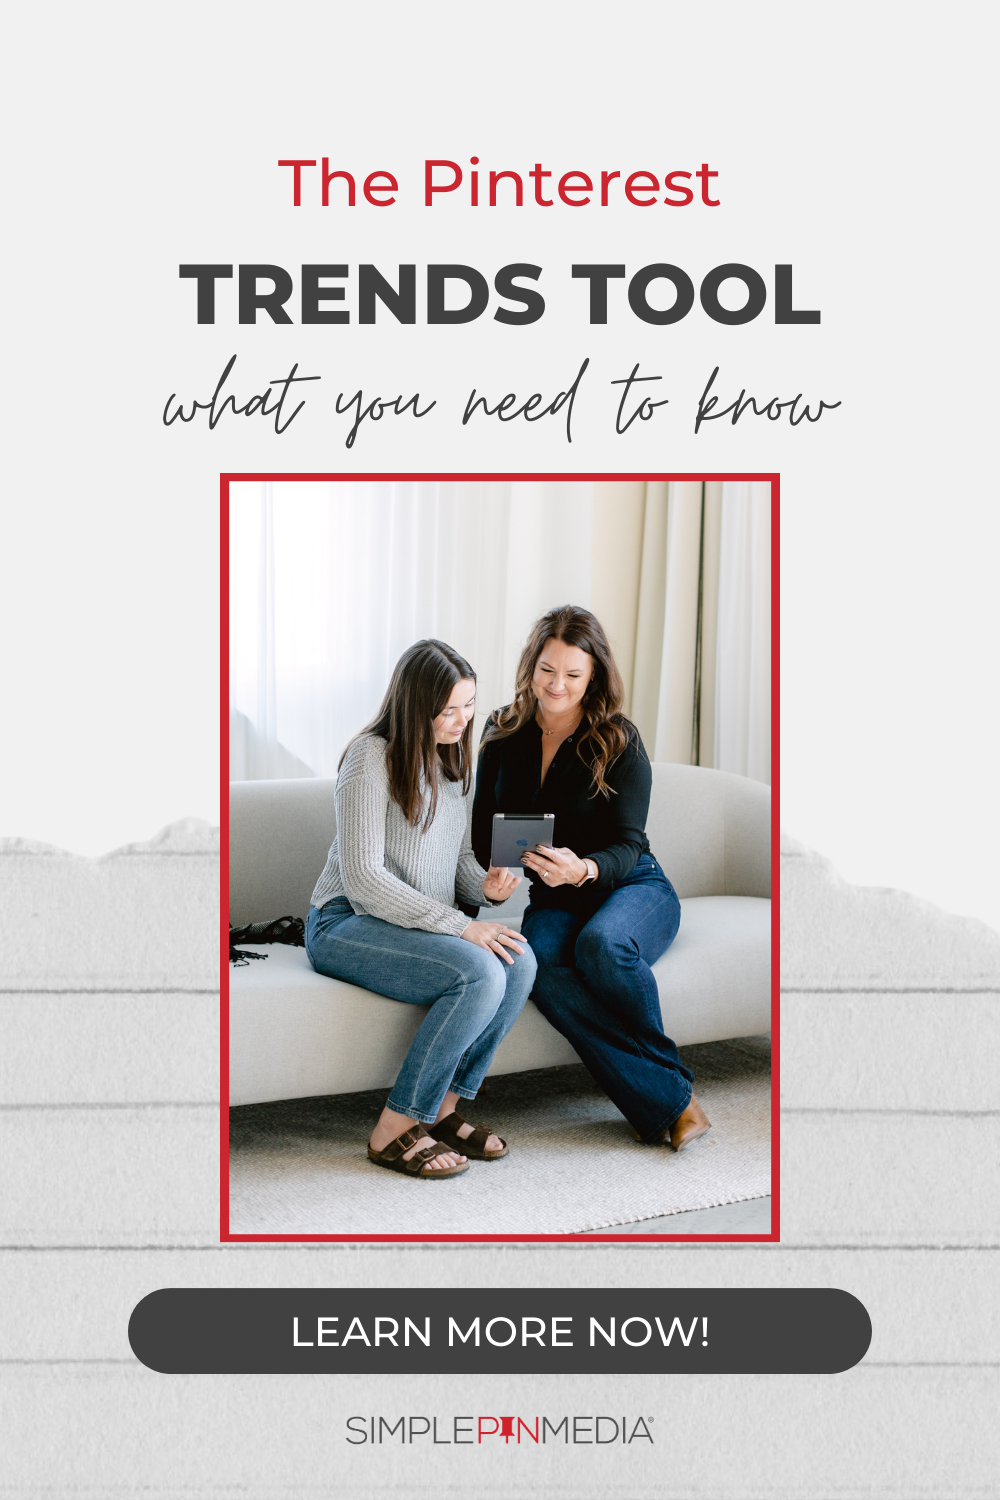 361 – How to Create Content from Pinterest Trends Tool